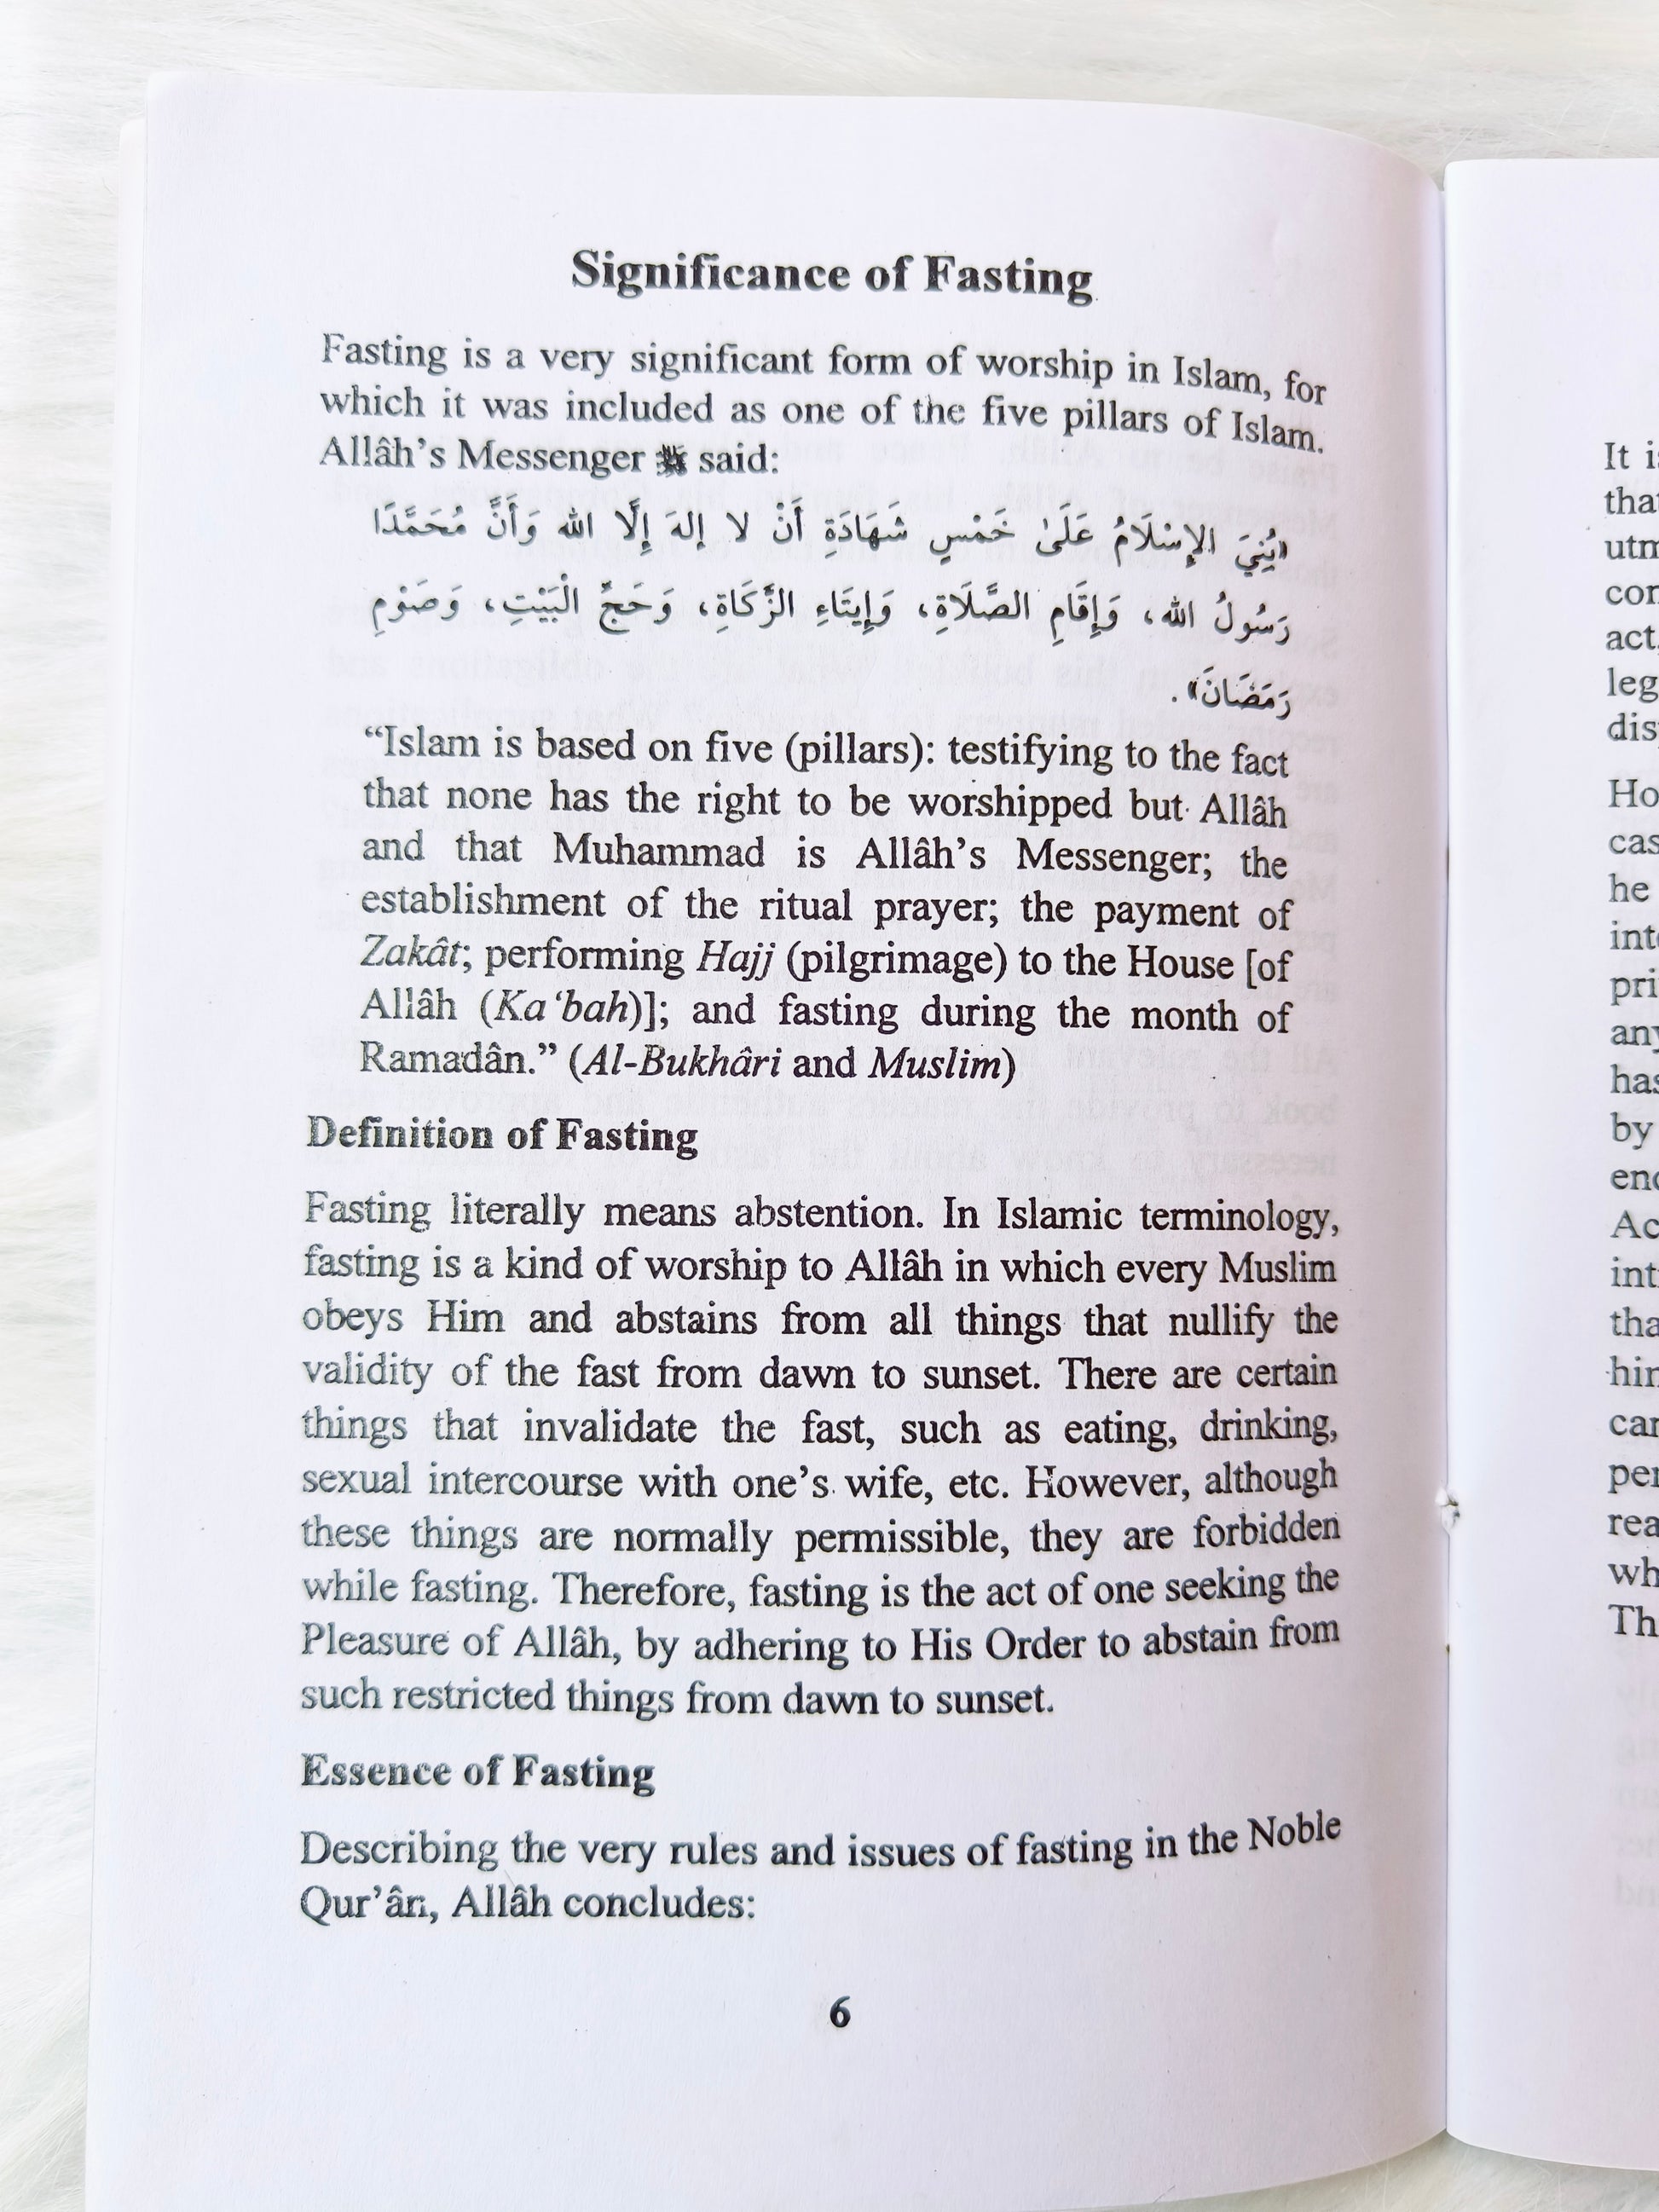 RAMADAN RULES AND RELATED ISSUES - alifthebookstore